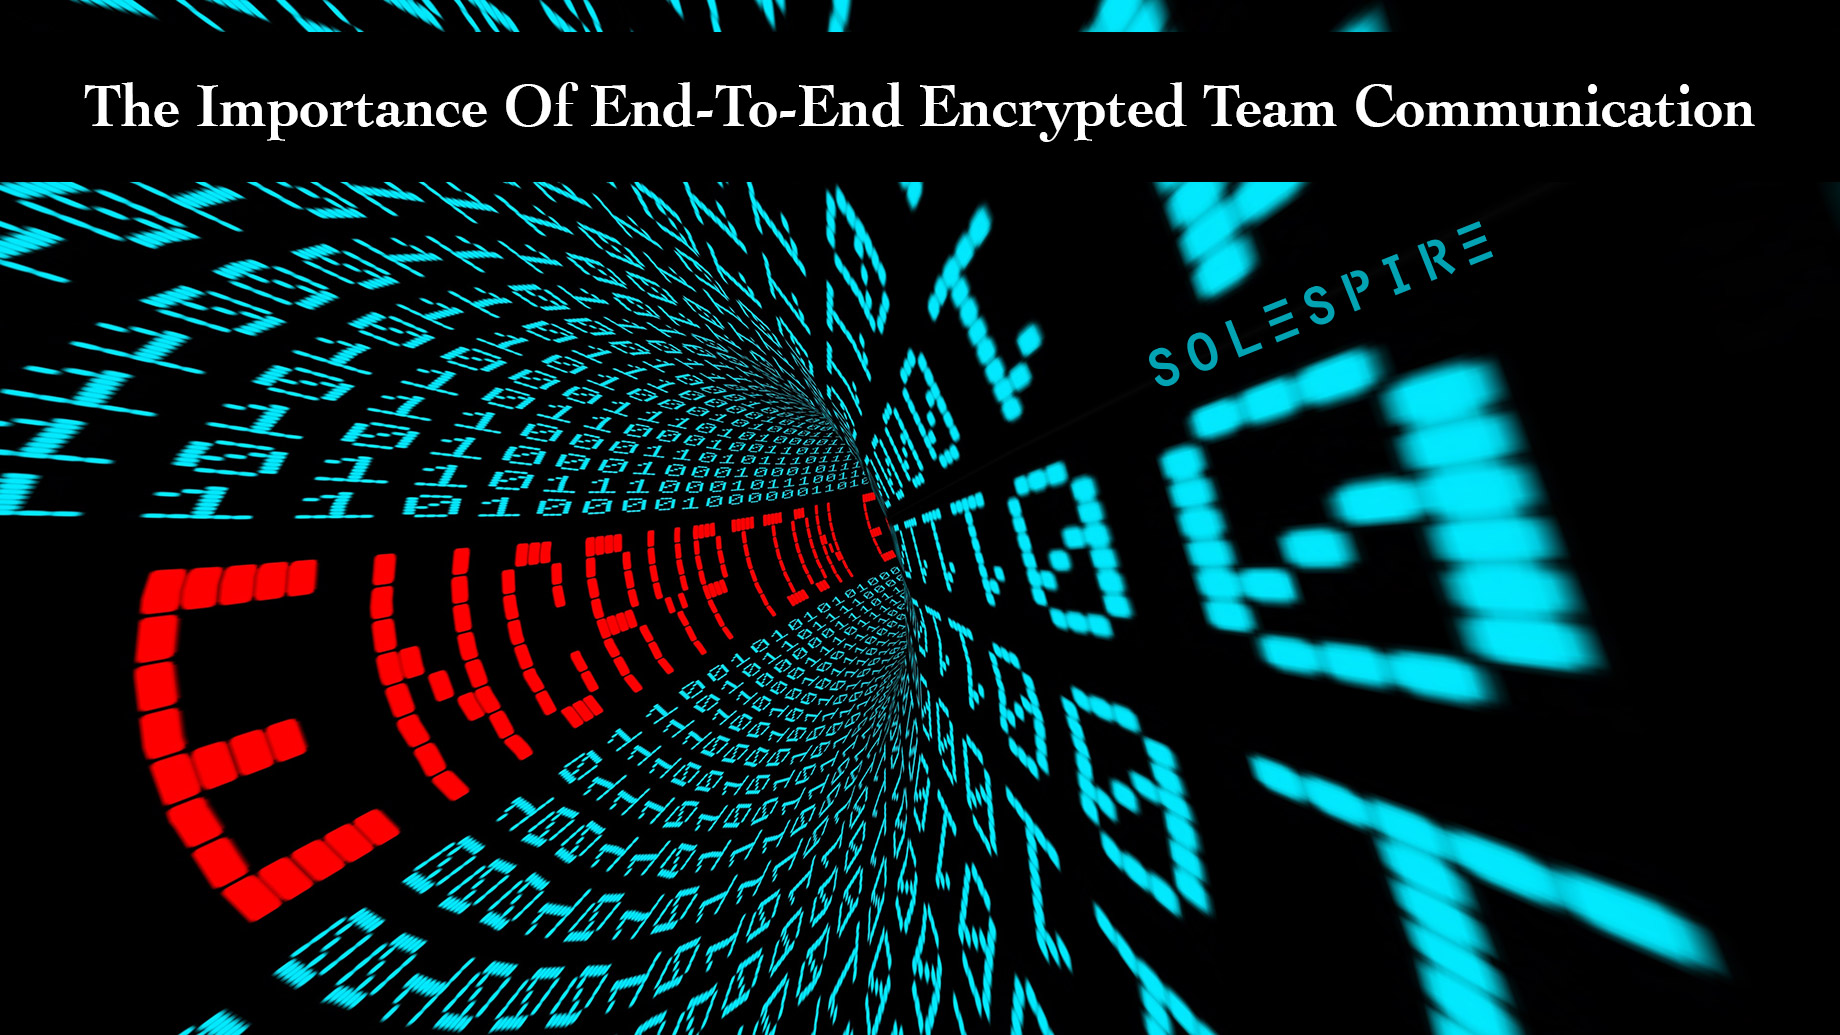 The Importance Of End-To-End Encrypted Team Communication